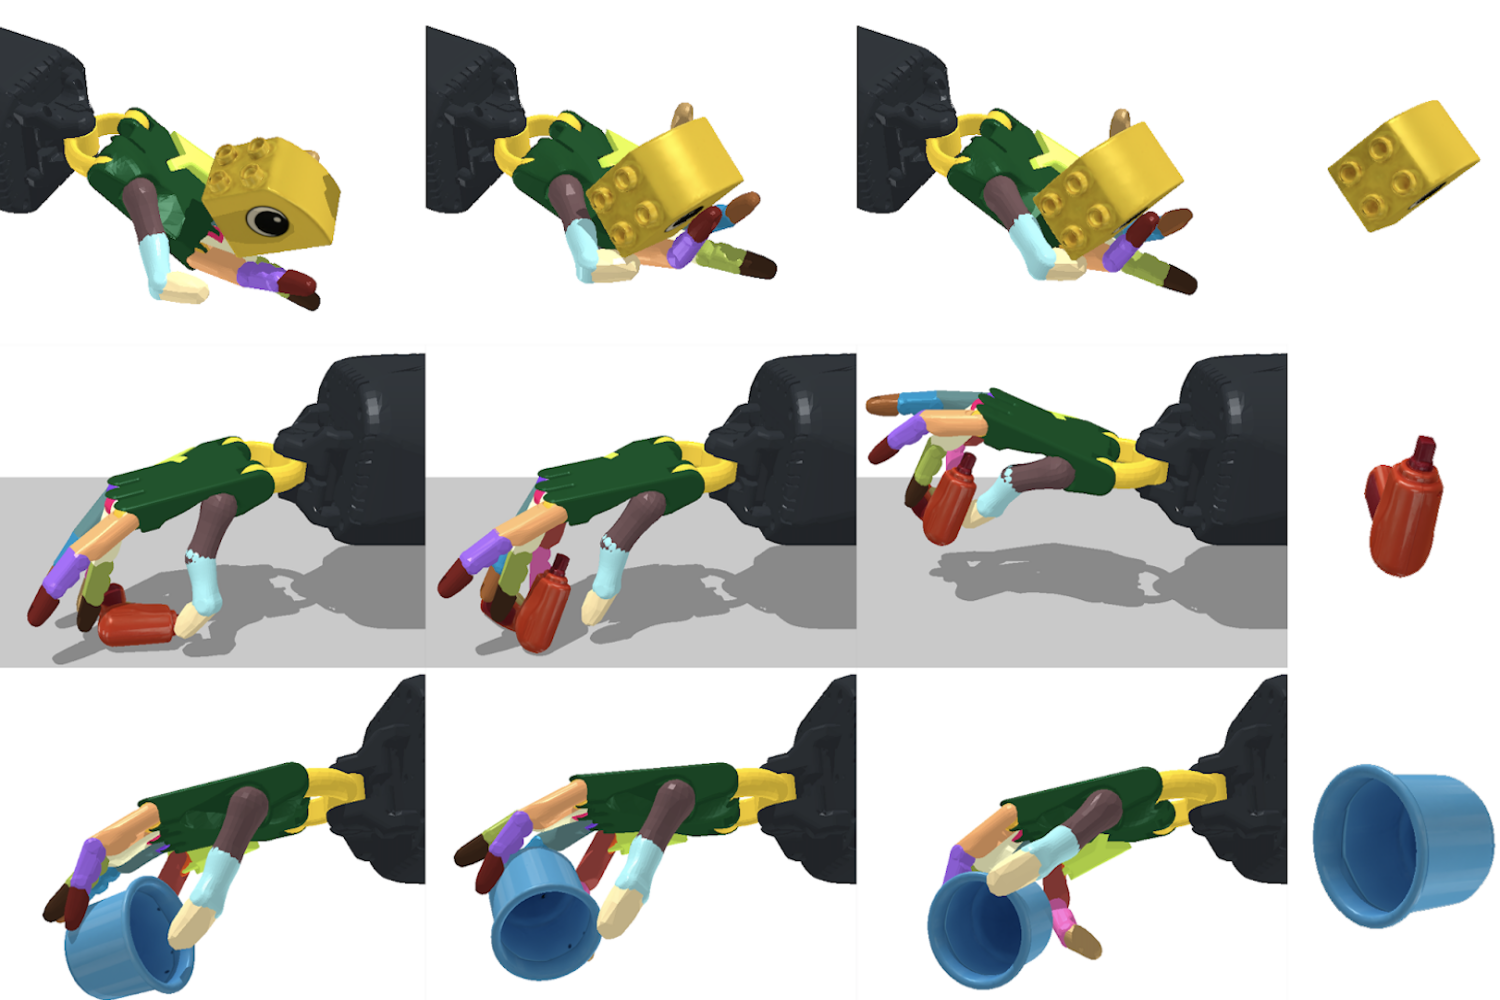 Dexterous robotic hands manipulate thousands objects with ease | MIT Massachusetts Institute of Technology